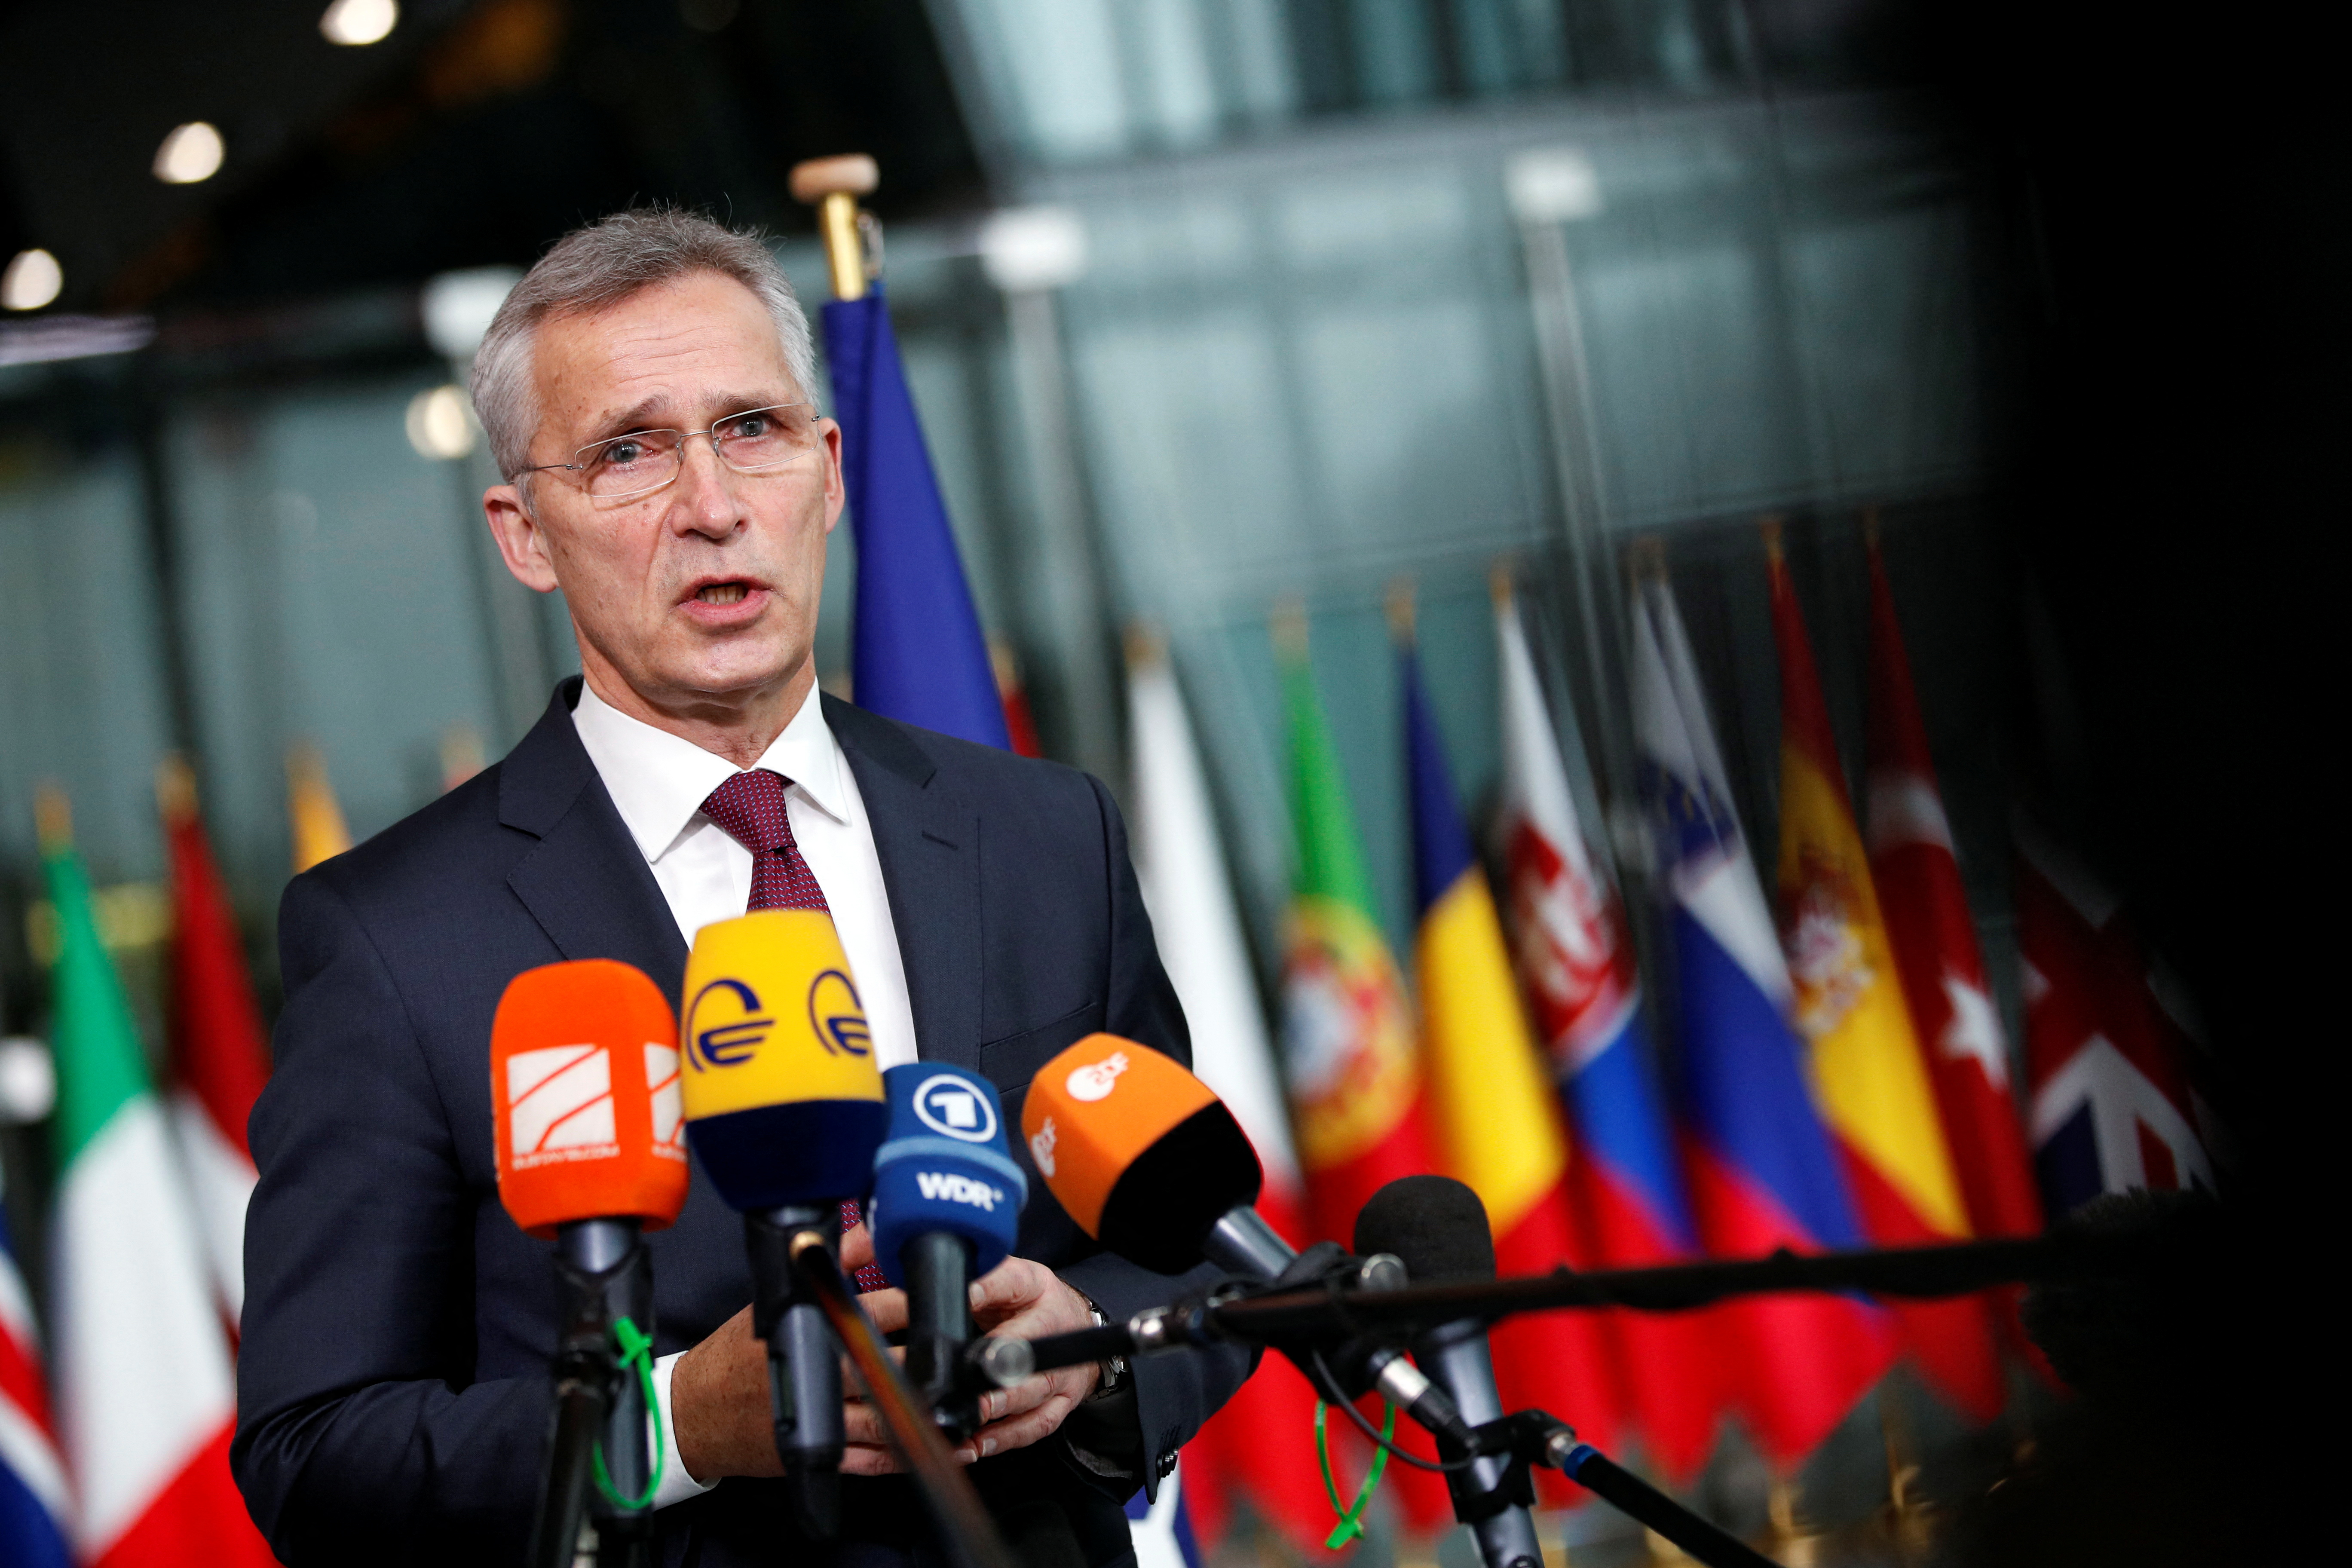 NATO Secretary-General Jens Stoltenberg speaks ahead of a NATO Defense Ministers meeting in Brussels, Belgium, February 16, 2022. REUTERS/Johanna Geron